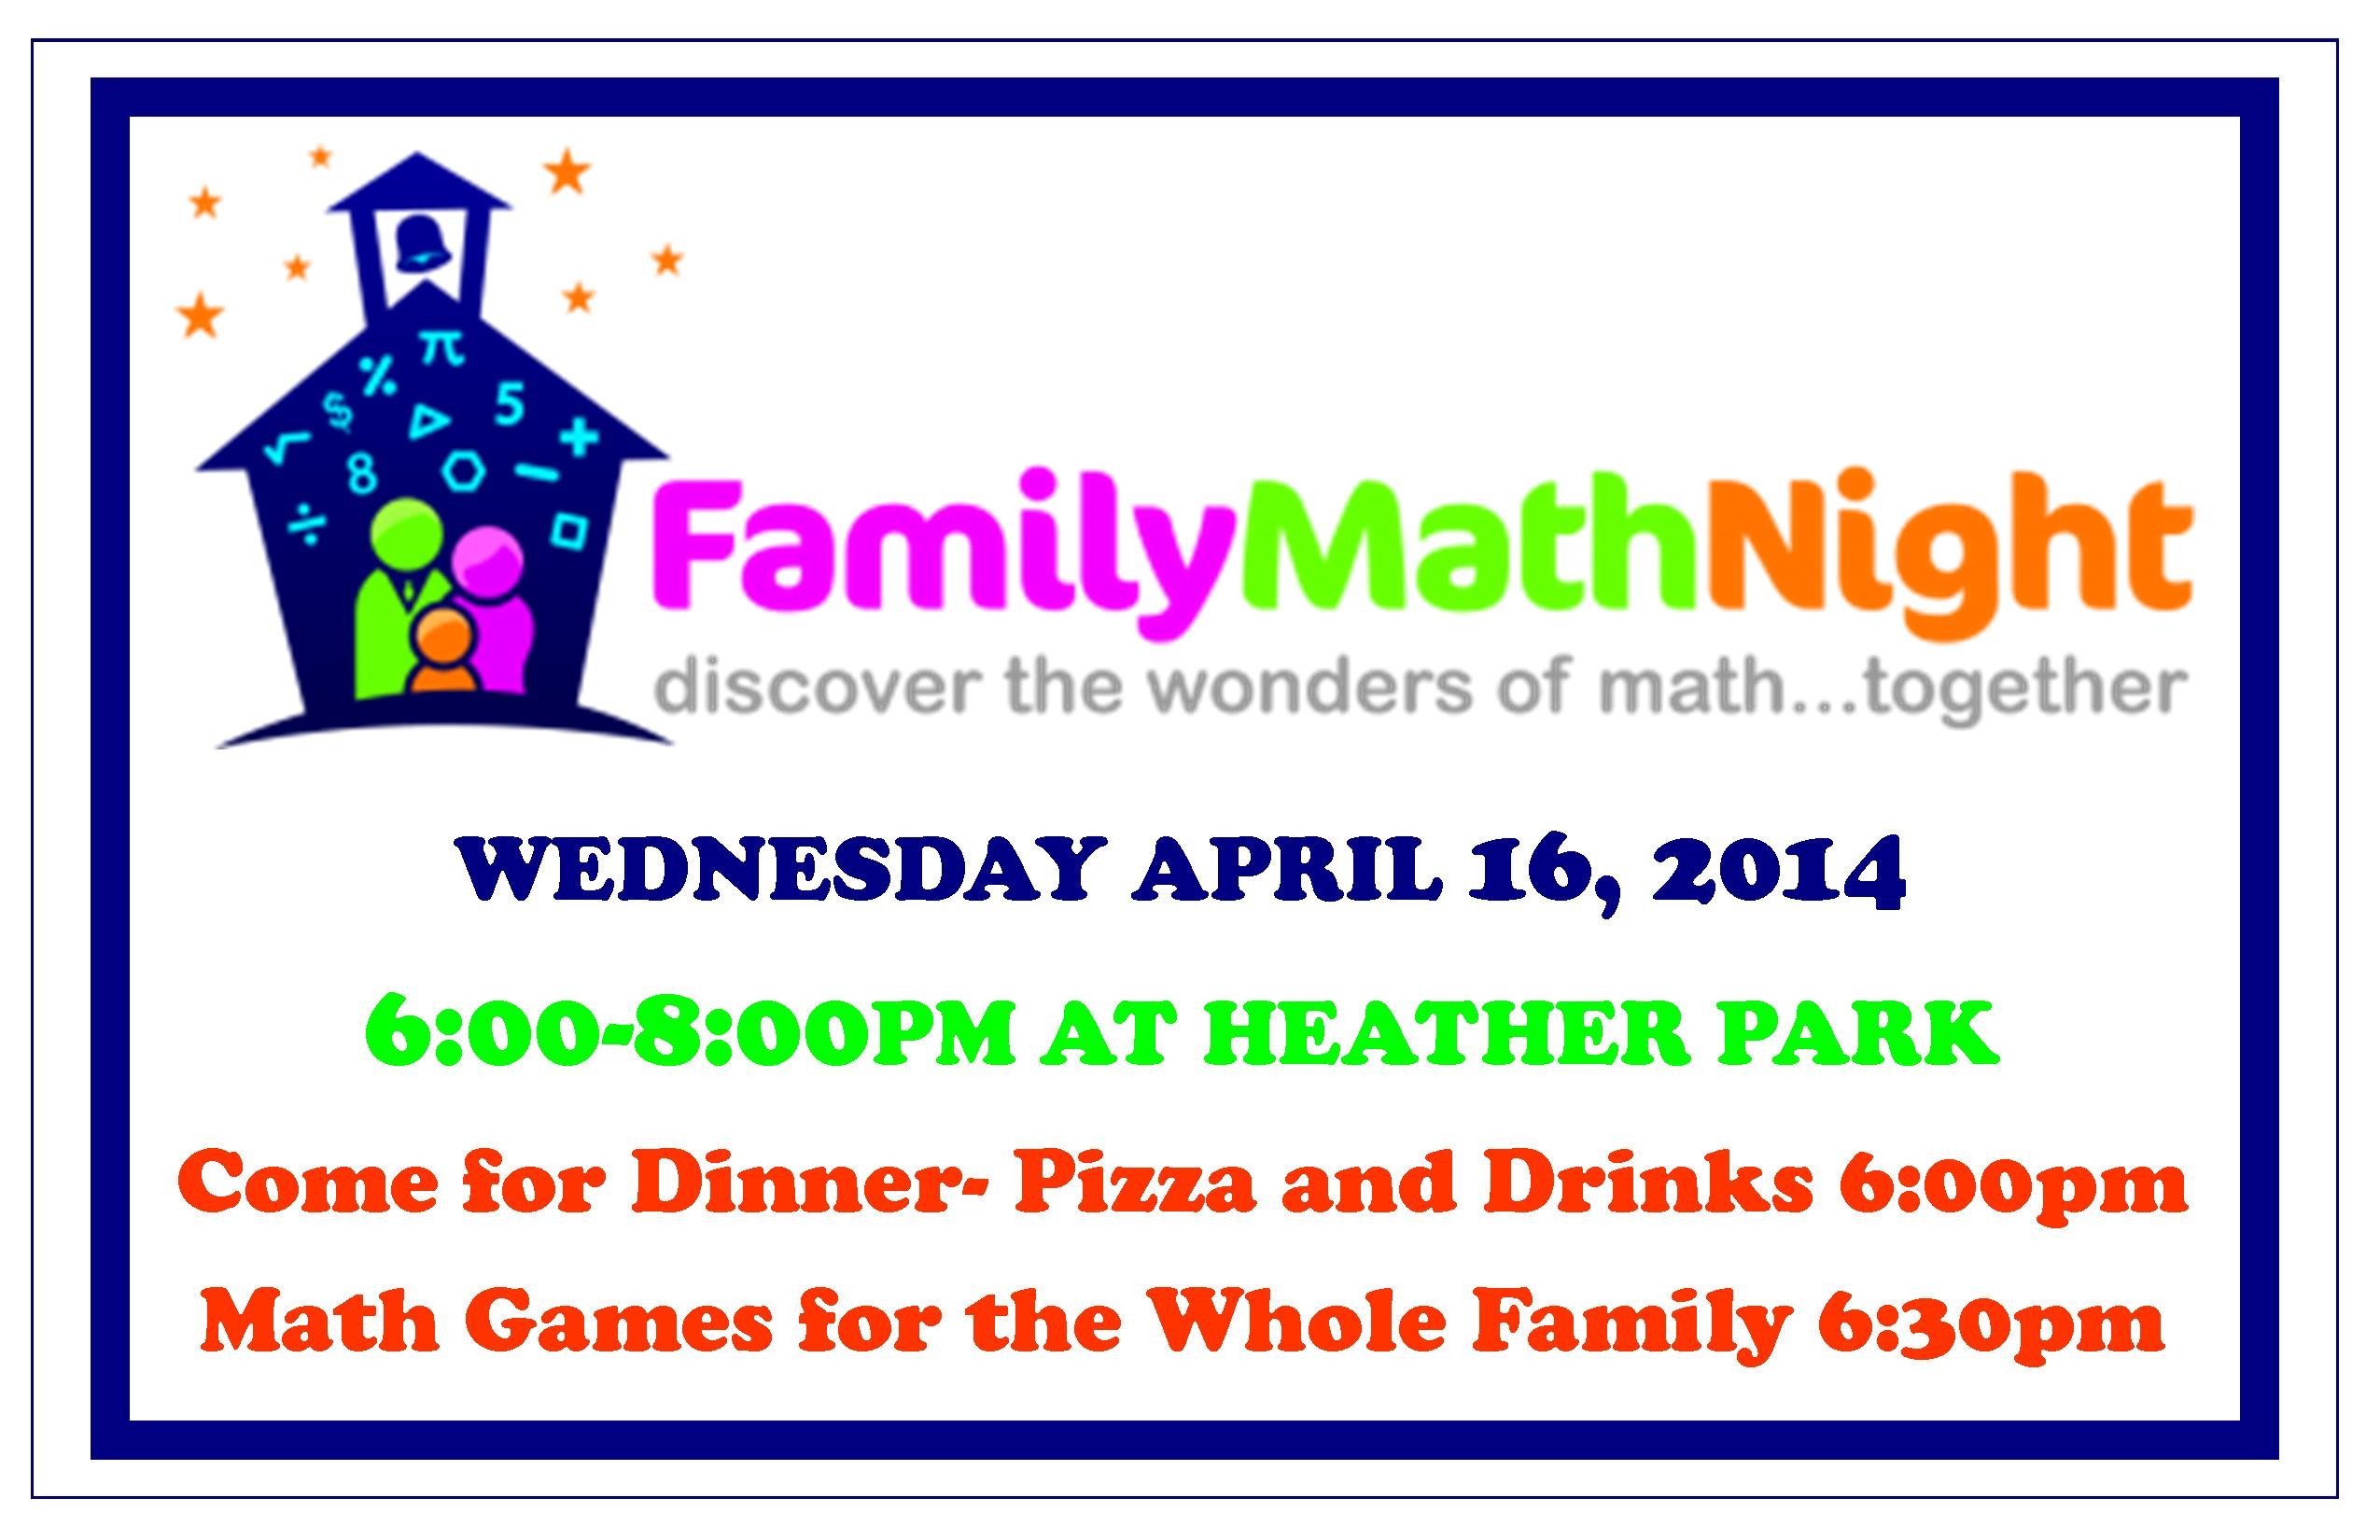 Family Math Night Flyers Family Math Night at Heather Park School Wednesday April